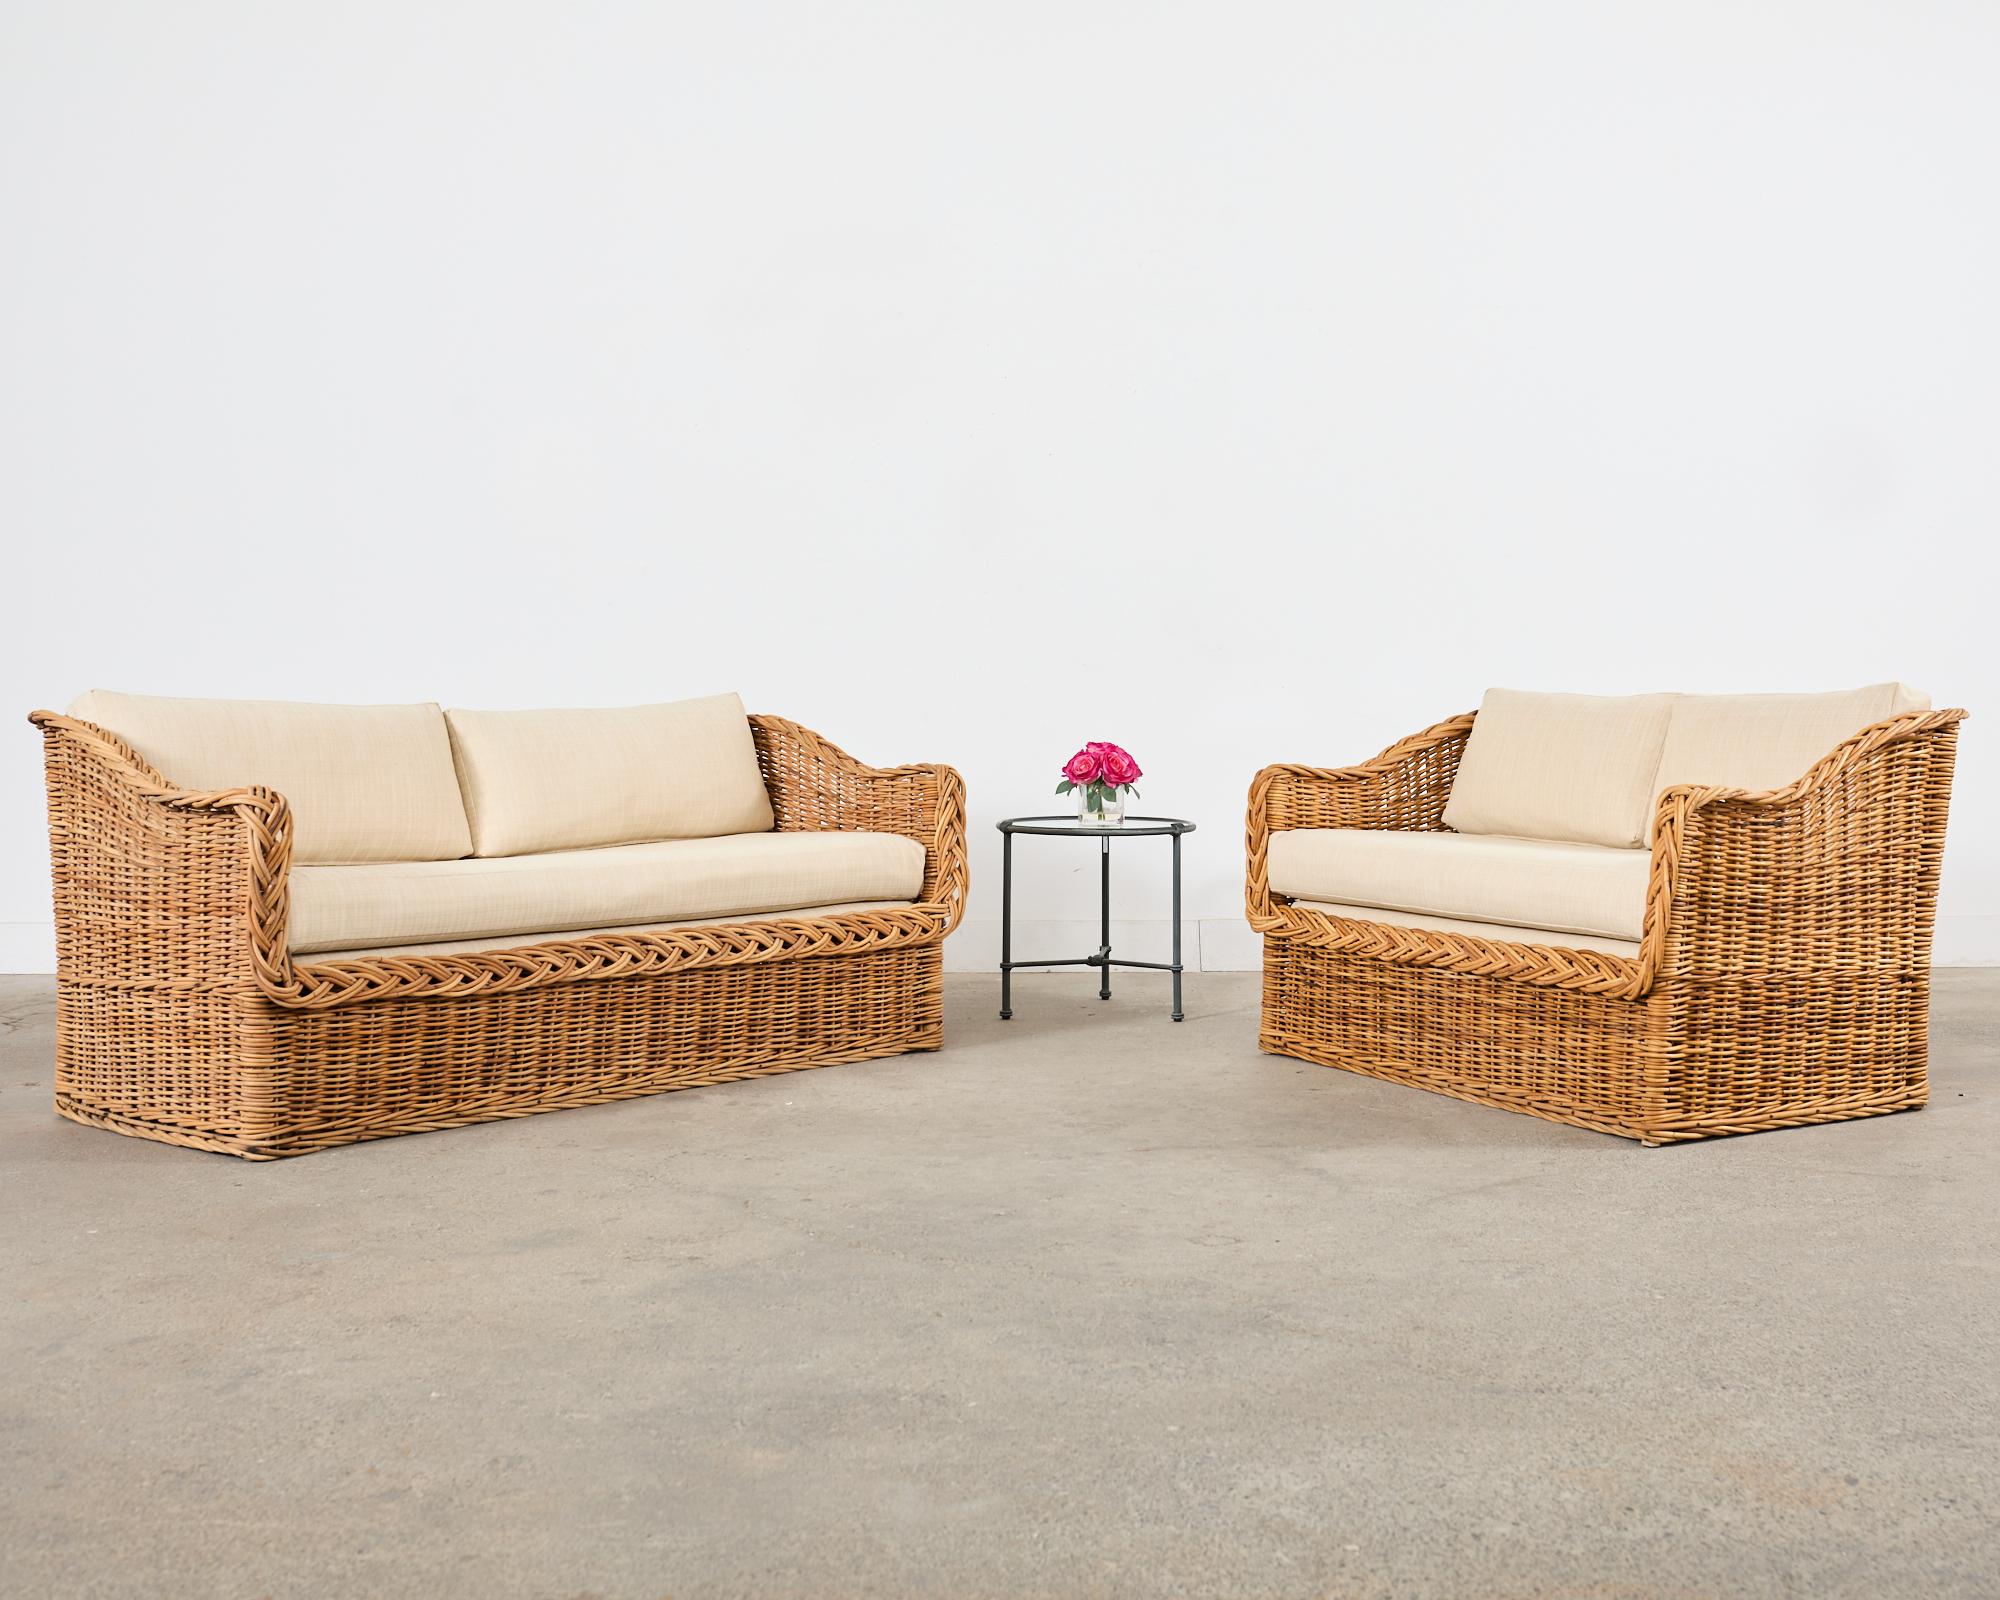 Gorgeous rattan sofa and loveseat settee pair handcrafted in Italy by wicker works. Made in the organic modern California coastal style and manner of Michael Taylor. Known as the classic square back design it features a hardwood frame covered with